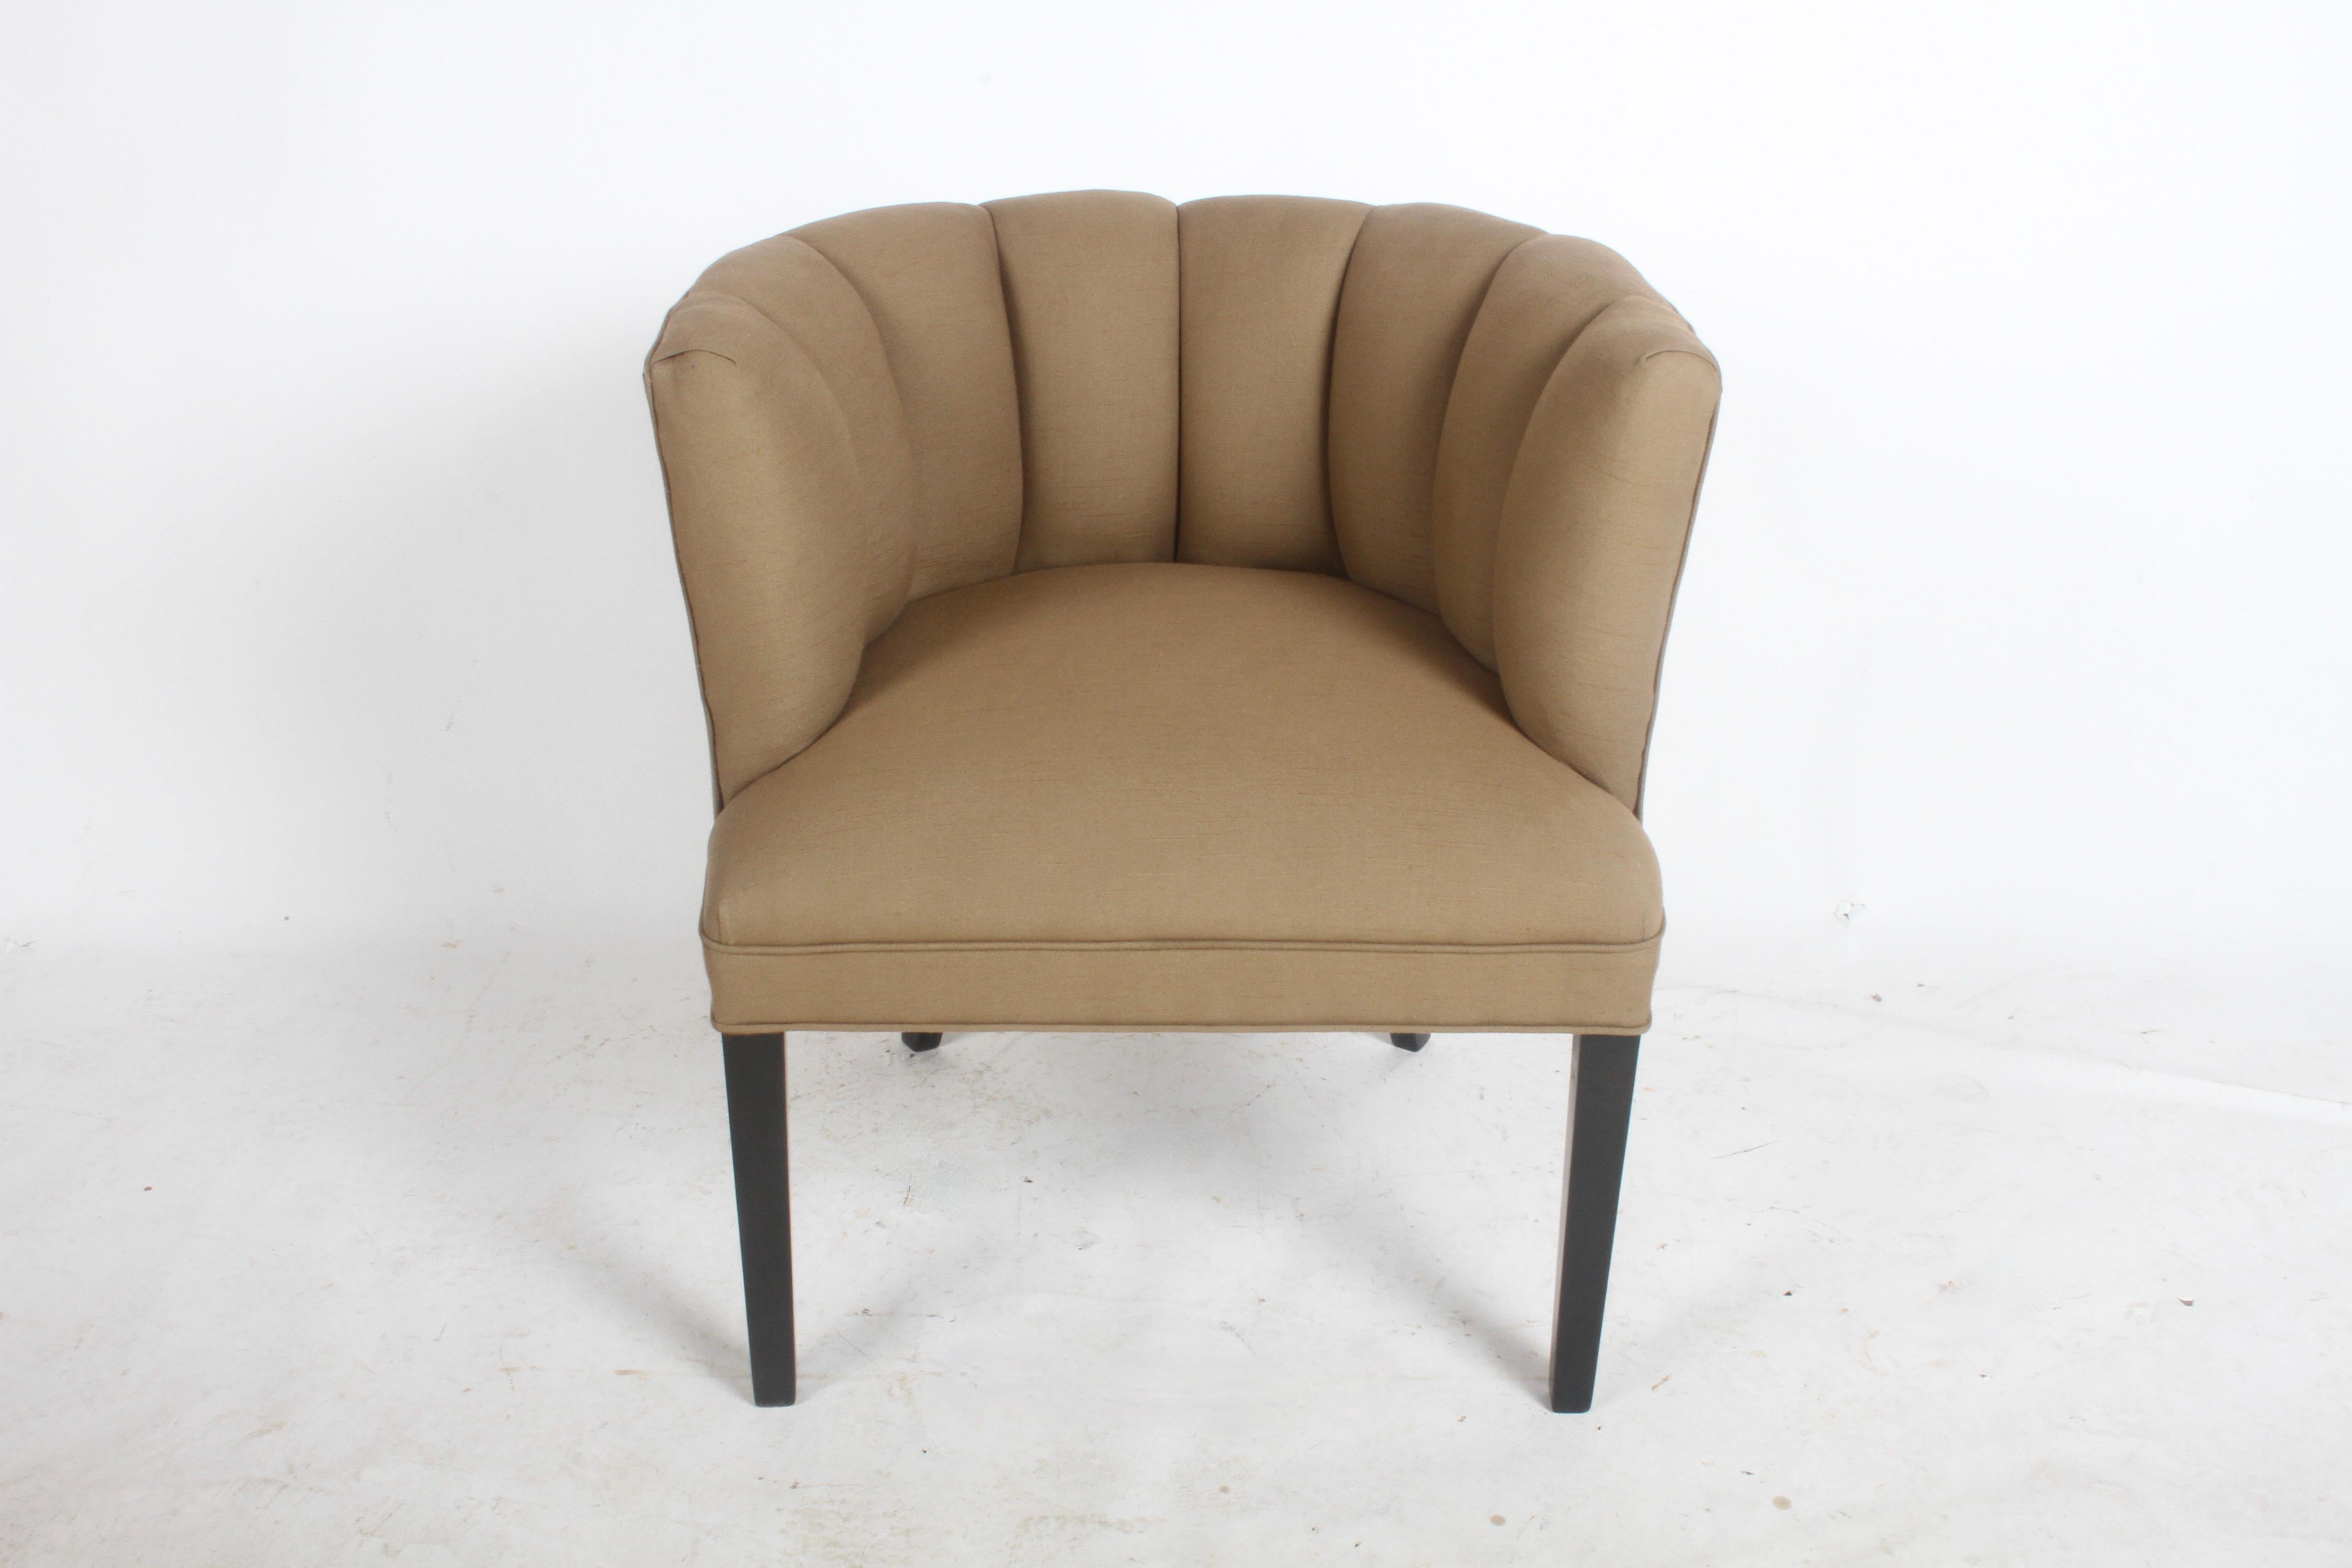 1940s Billy Haines style channel back occasional tub chair, reupholstered in a mocha beige linen fabric with refinished dark mahogany legs. 

